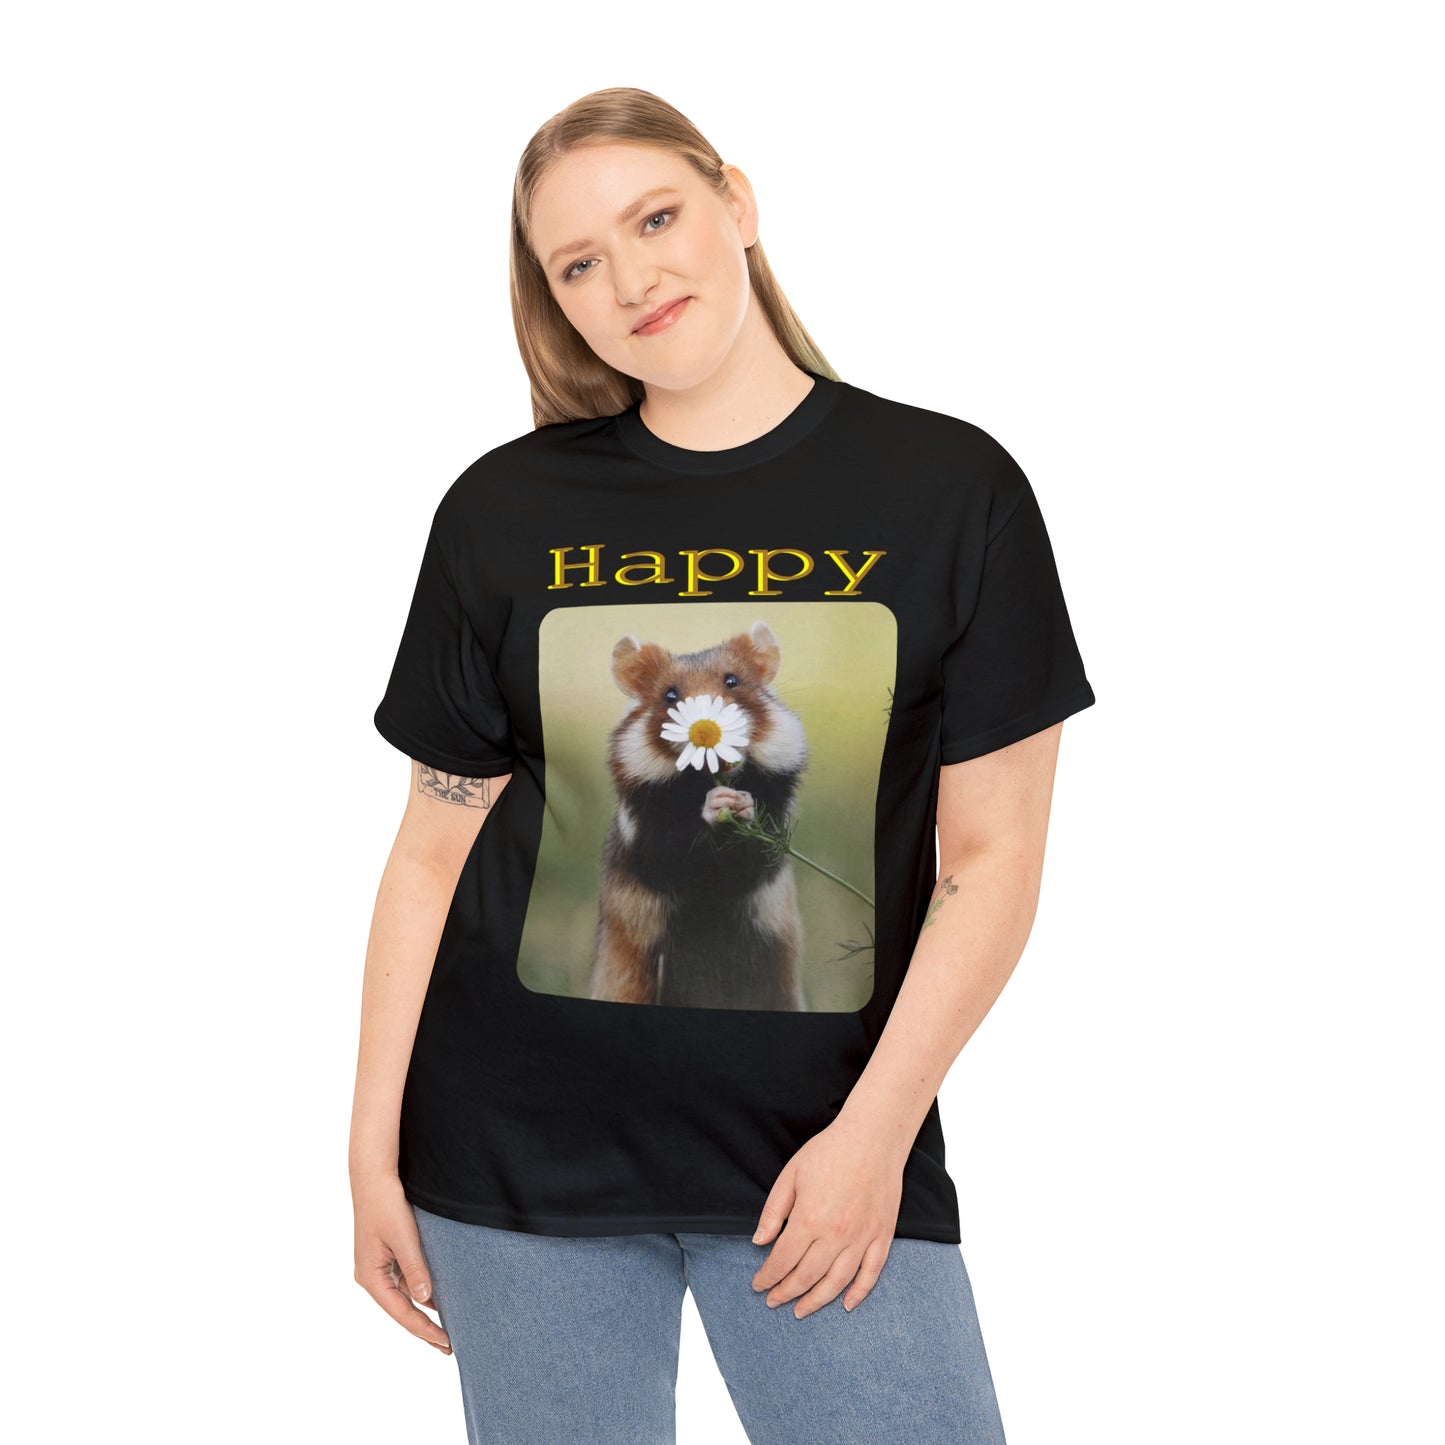 Happy Field Mouse - Hurts Shirts Collection